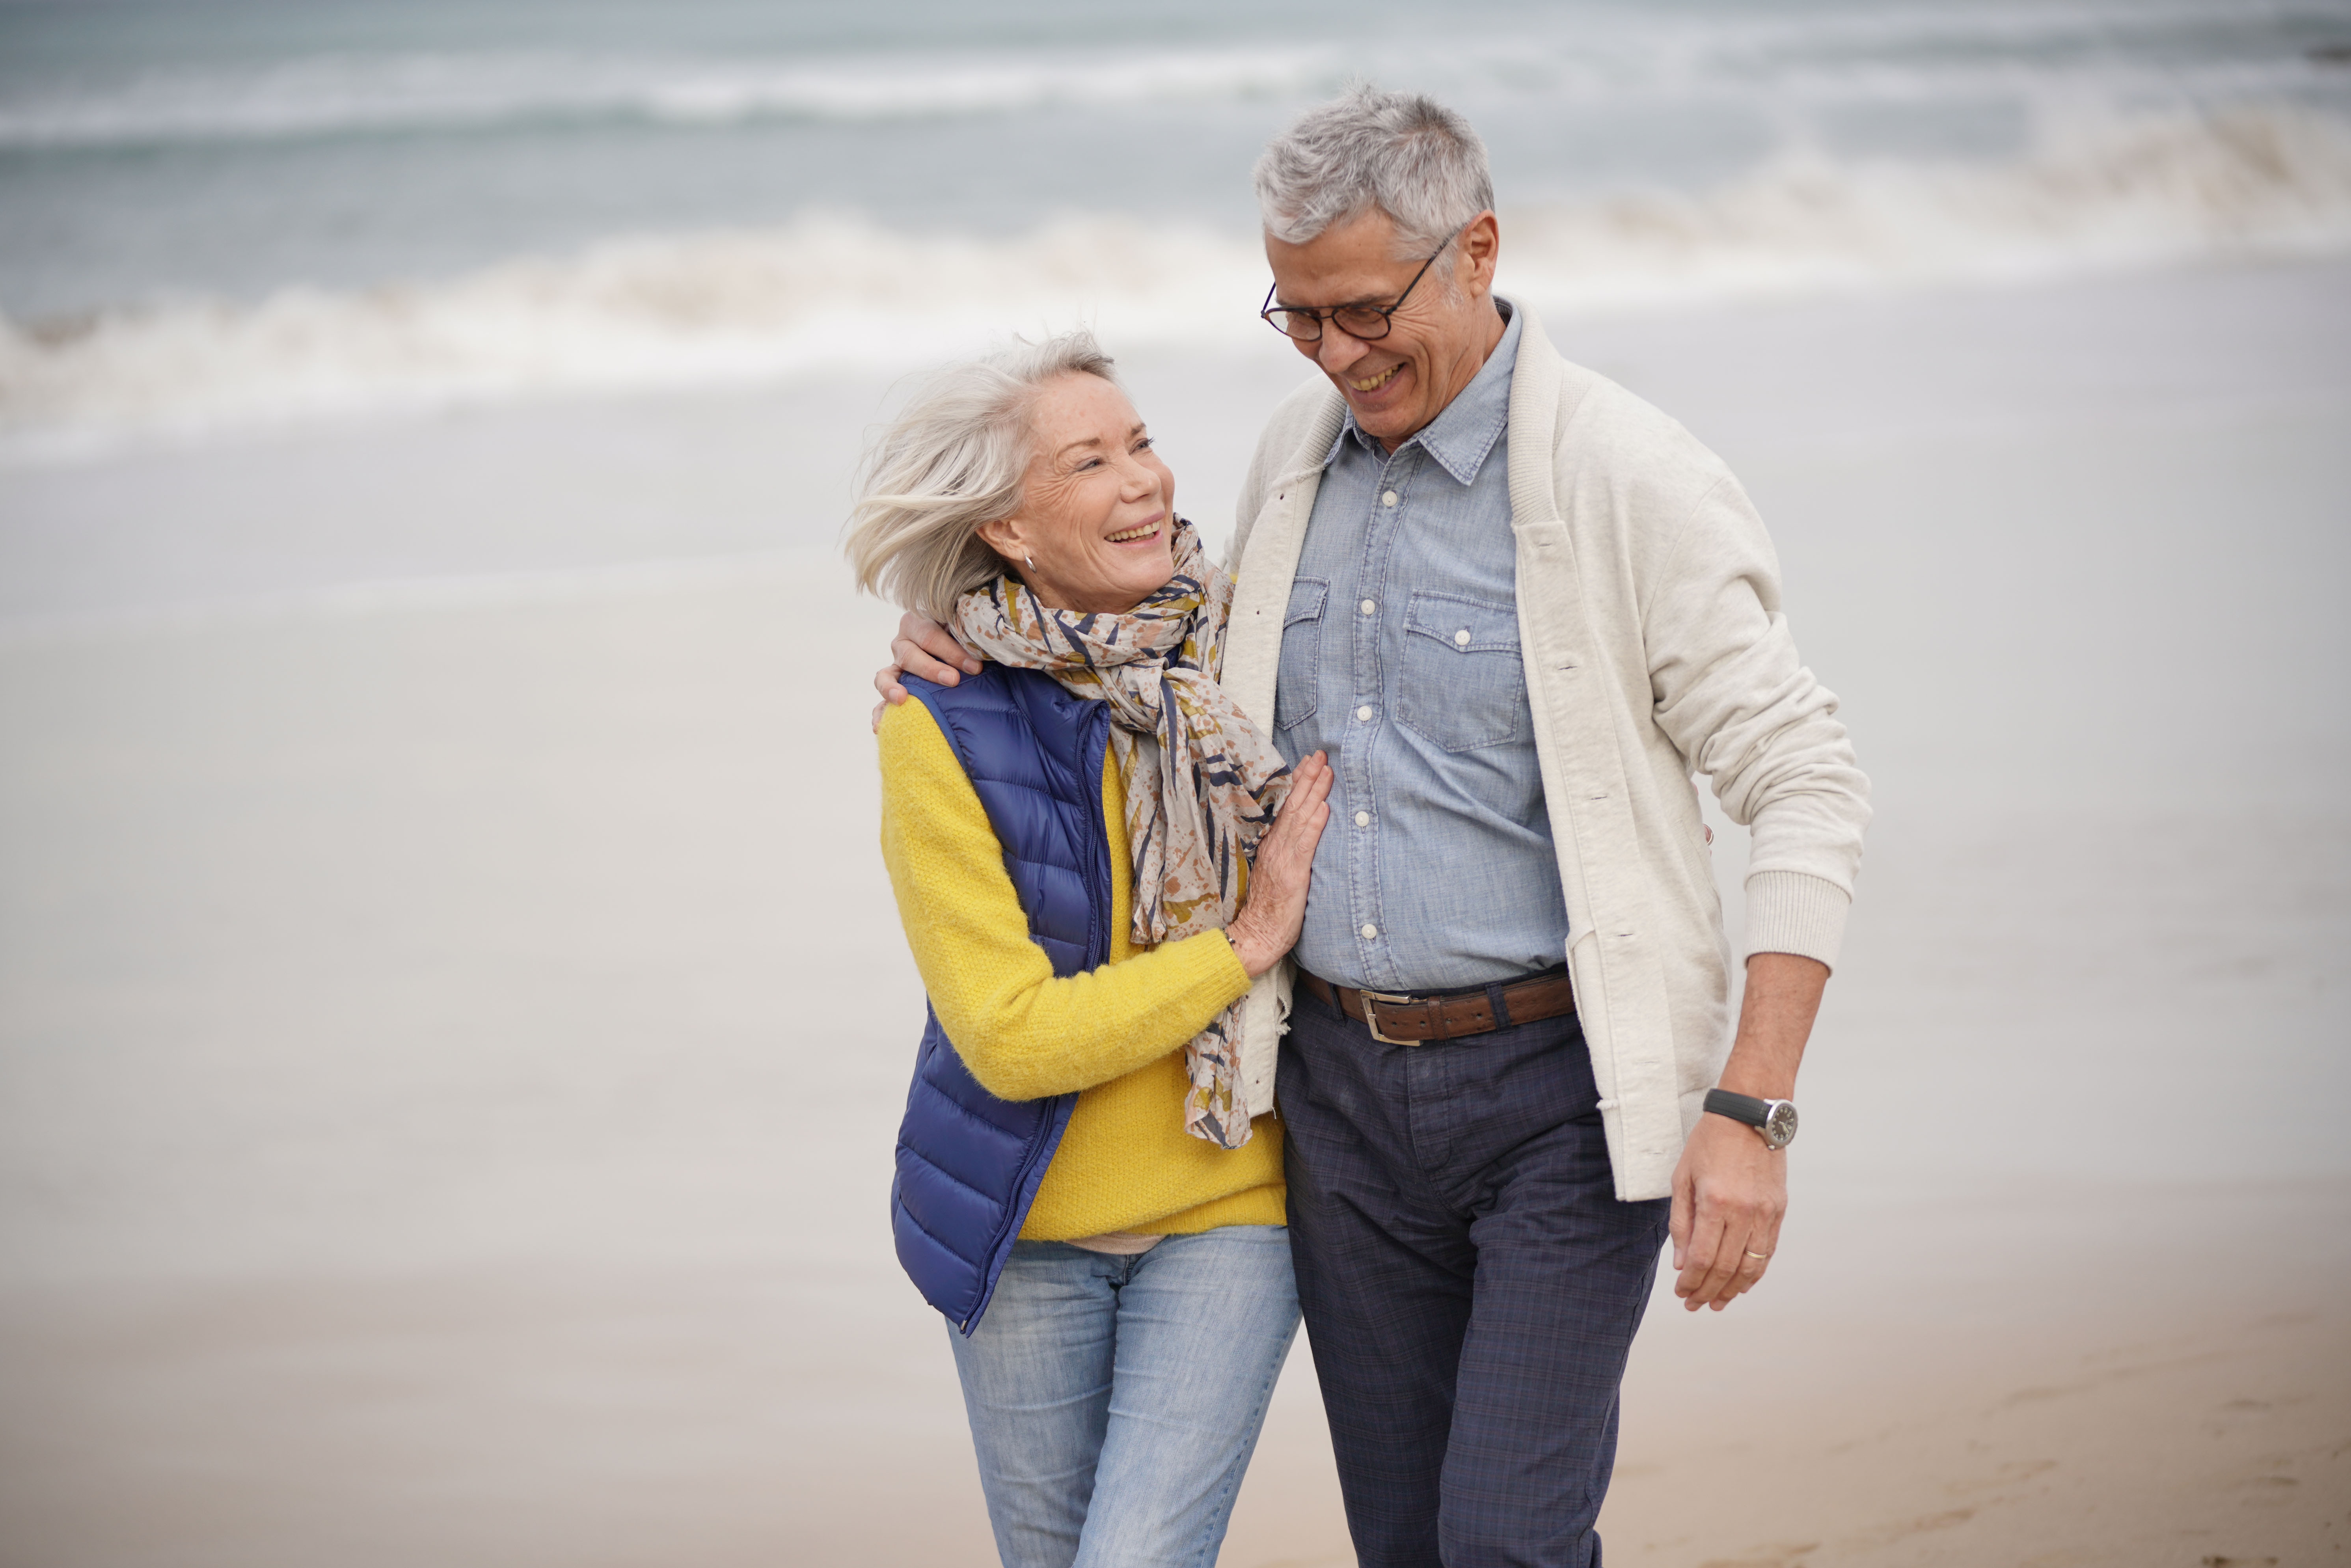 Older couple walking on beach with arms around onanother